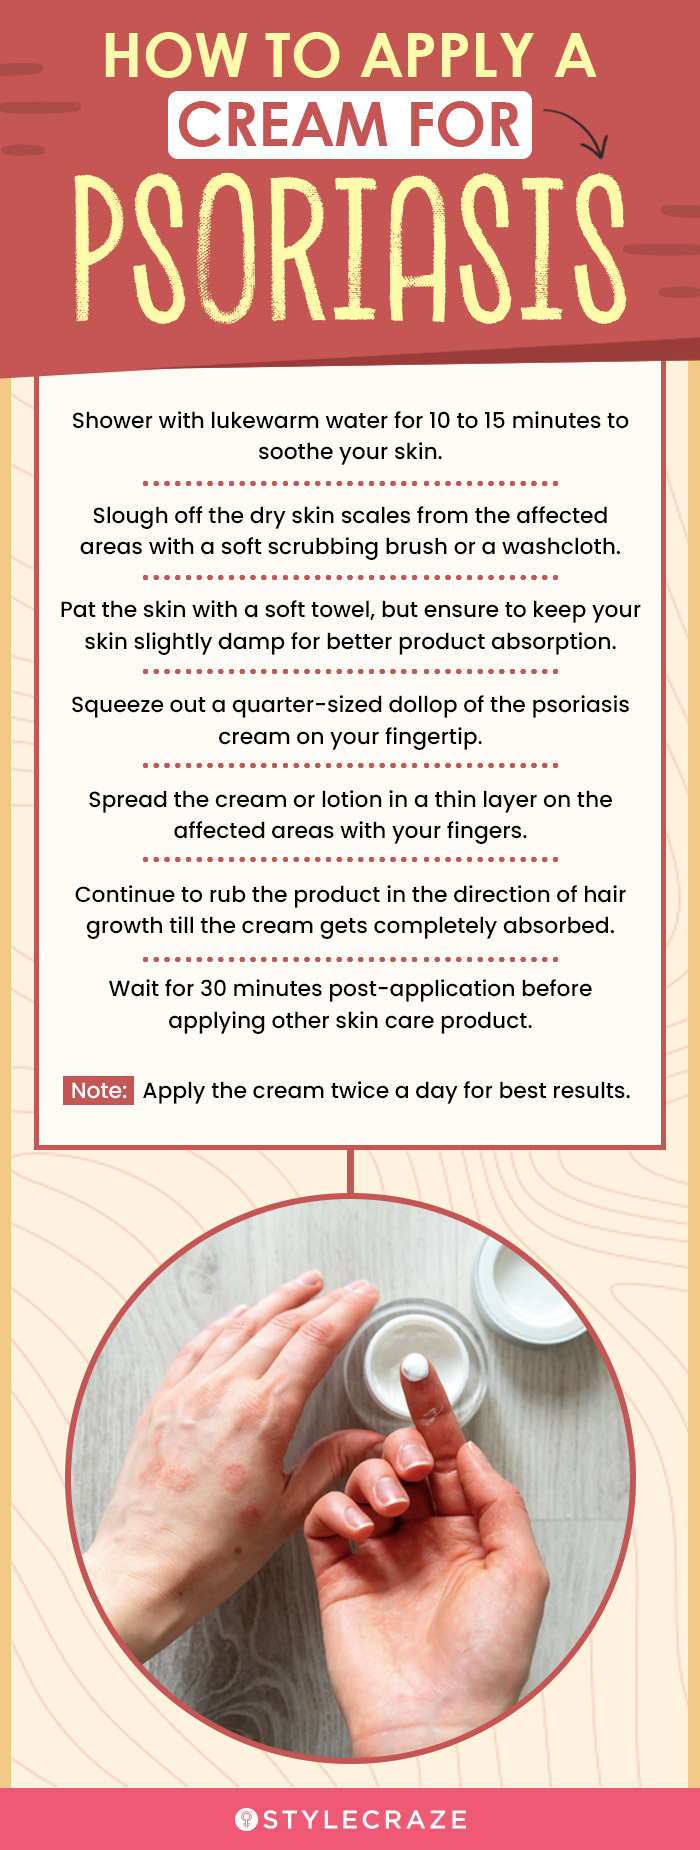 How To Apply A Cream For Psoriasis (infographic)